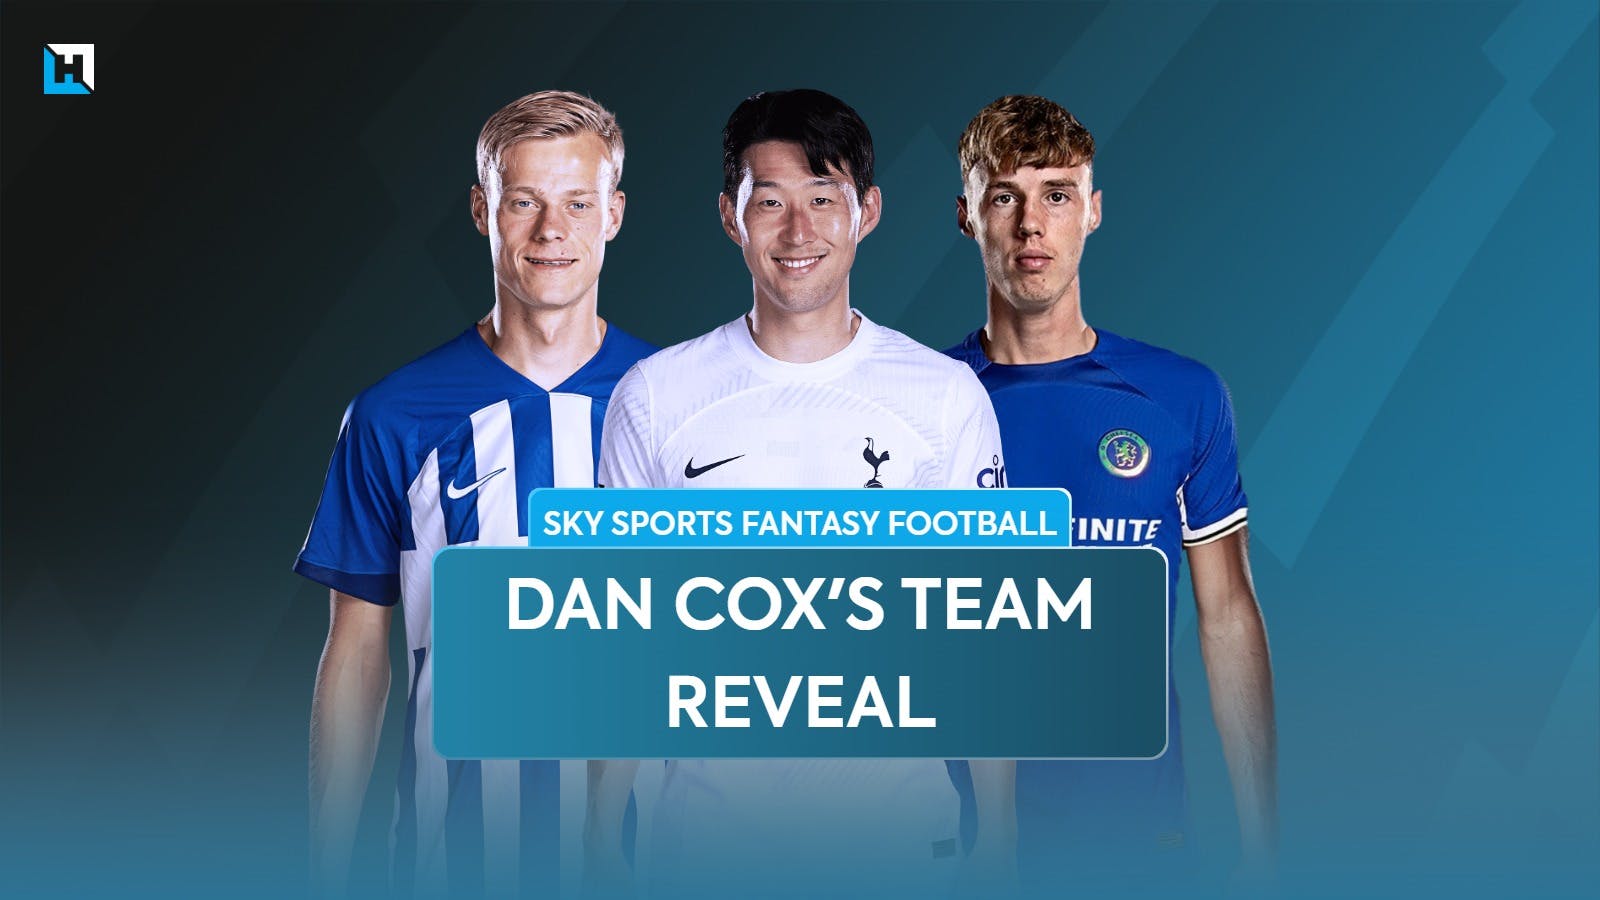 Dan Cox’s Sky Sports Fantasy Football Gameweek 36 preview and team reveal